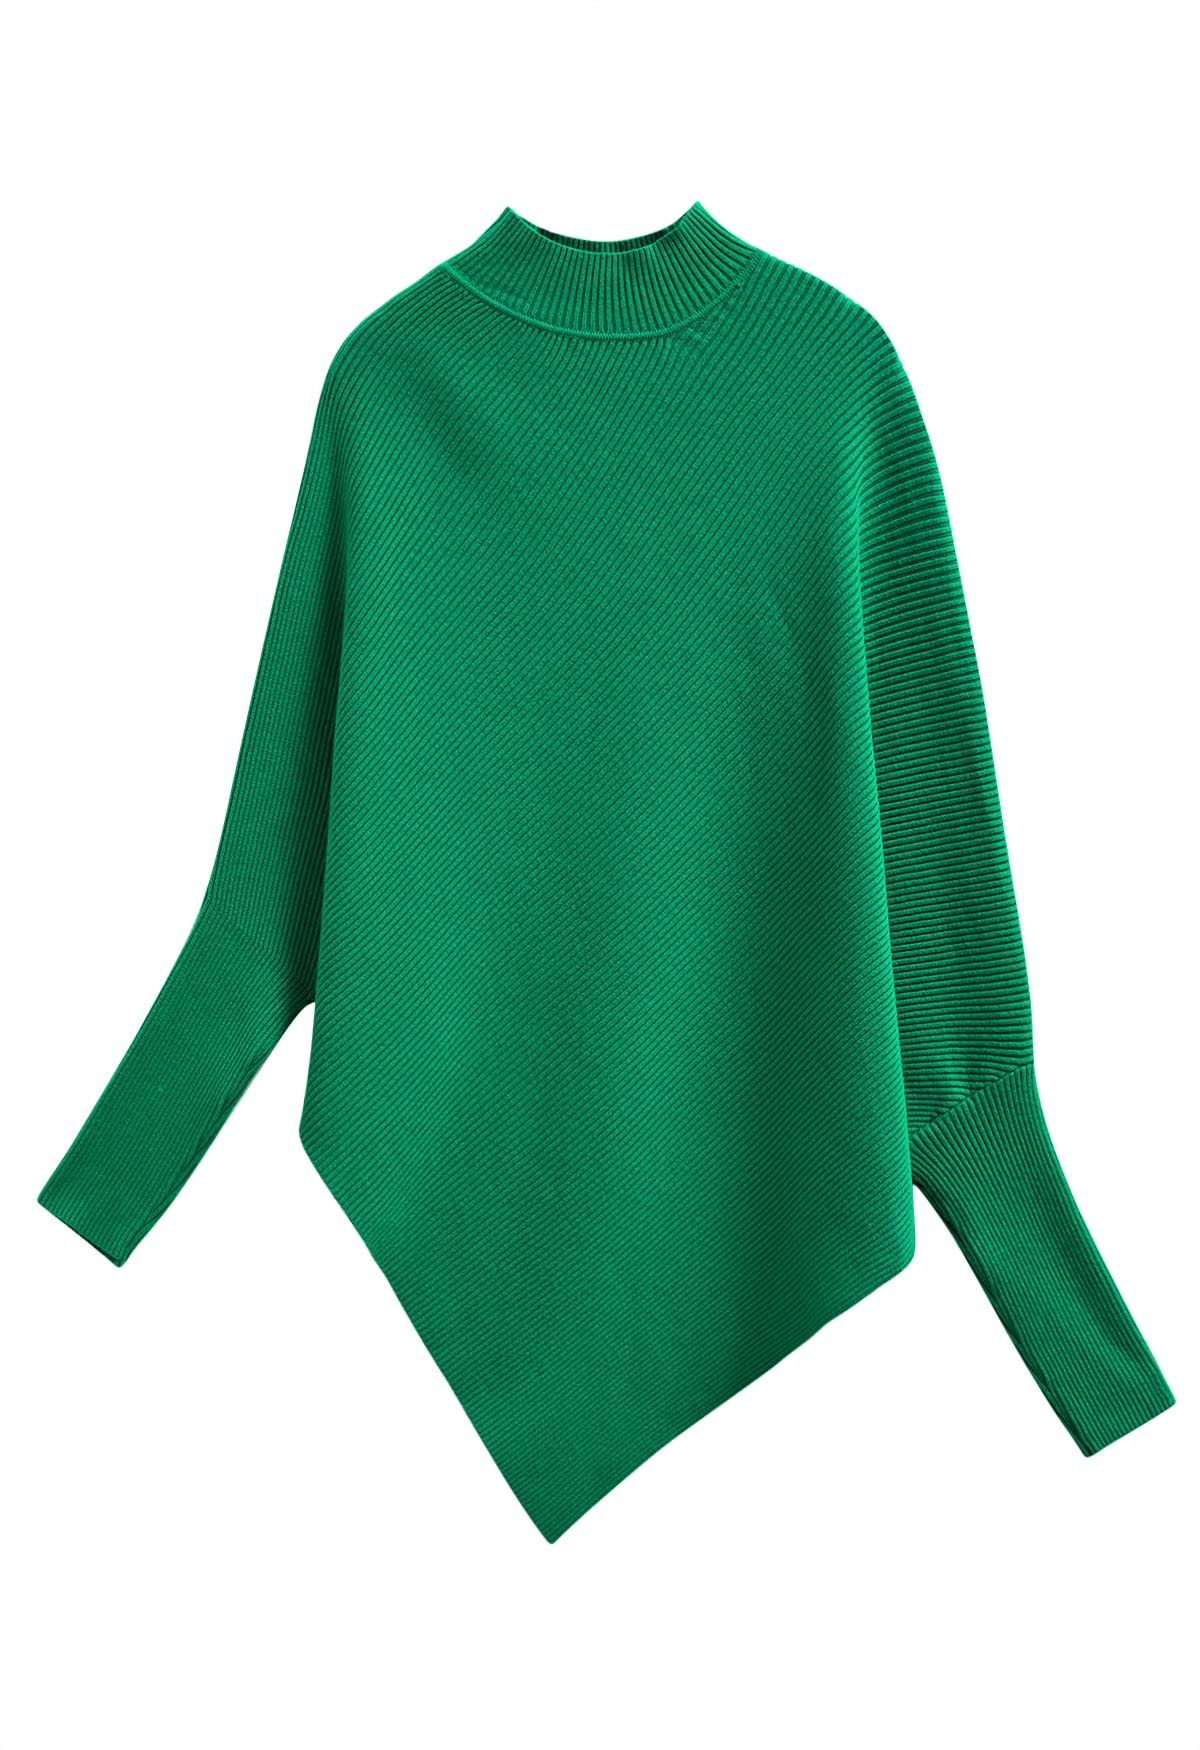 Asymmetric Batwing Sleeve Ribbed Knit Poncho in Green